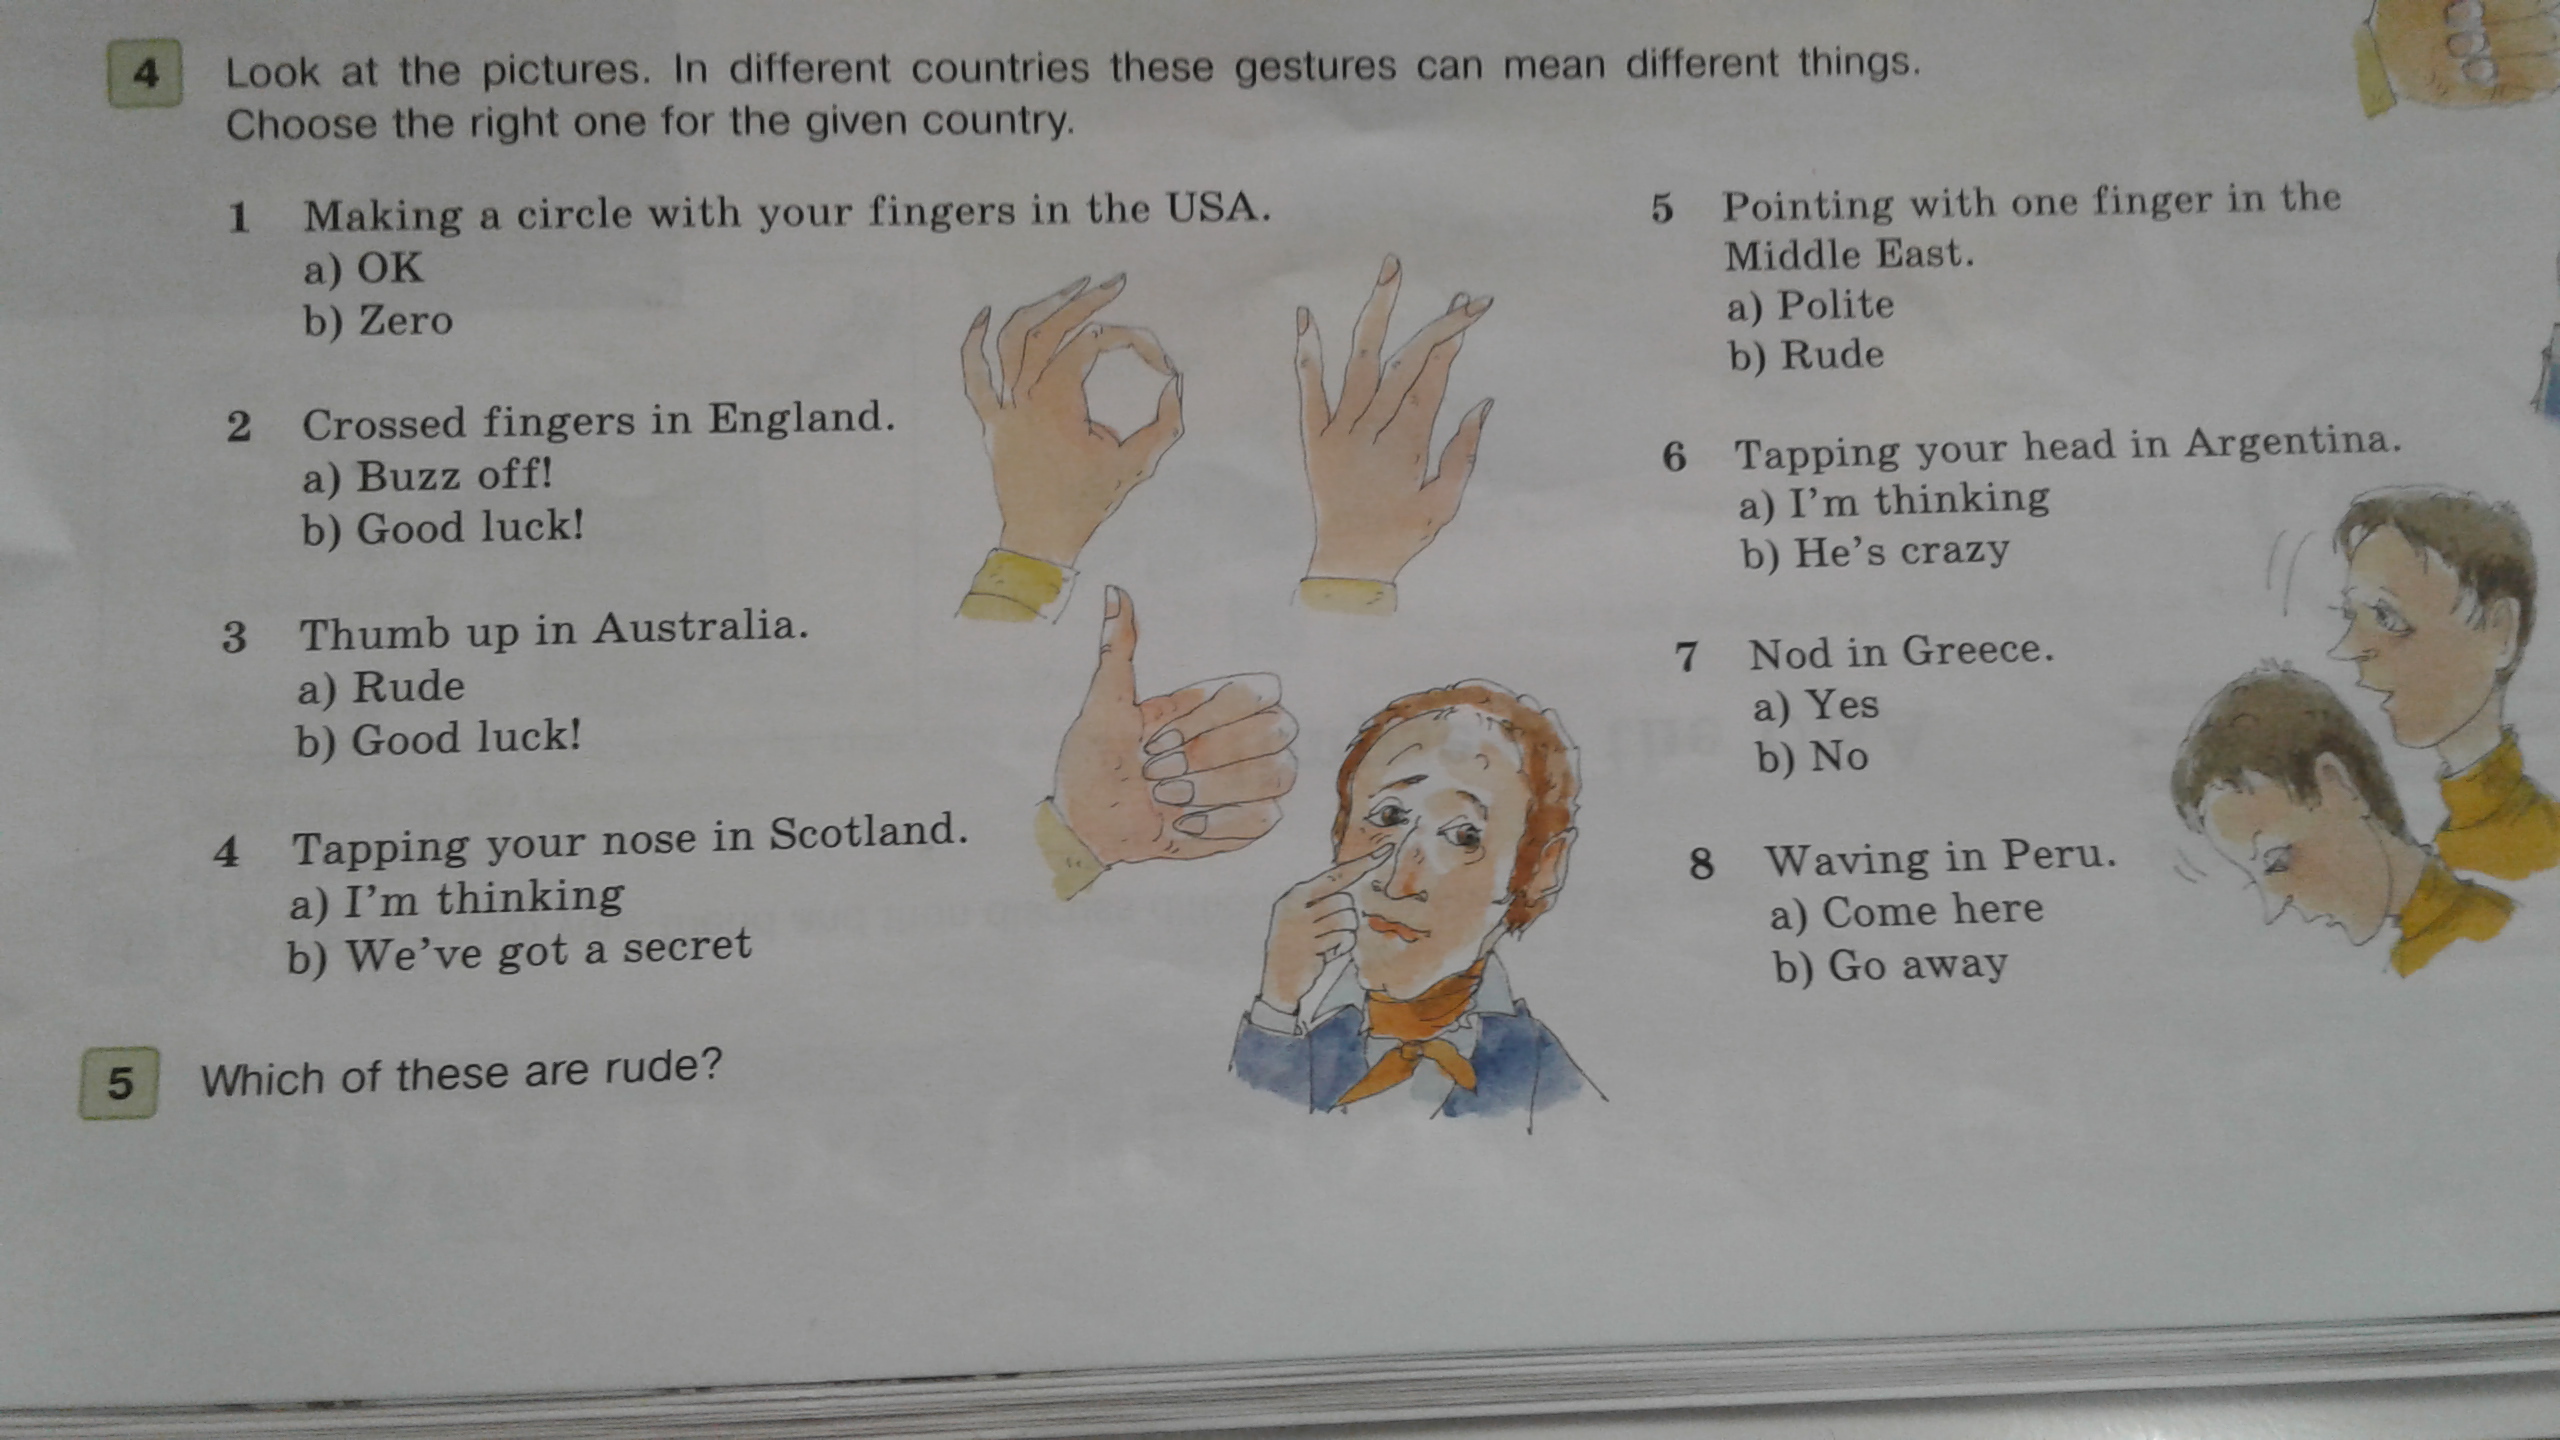 Look at this these pictures. Choose the picture ответы. Look at the pictures in different Countries these gestures can mean different things ответы. Crossed fingers in England. Look at the pictures in different Countries these gestures can mean different things choose the right one for the given Country..